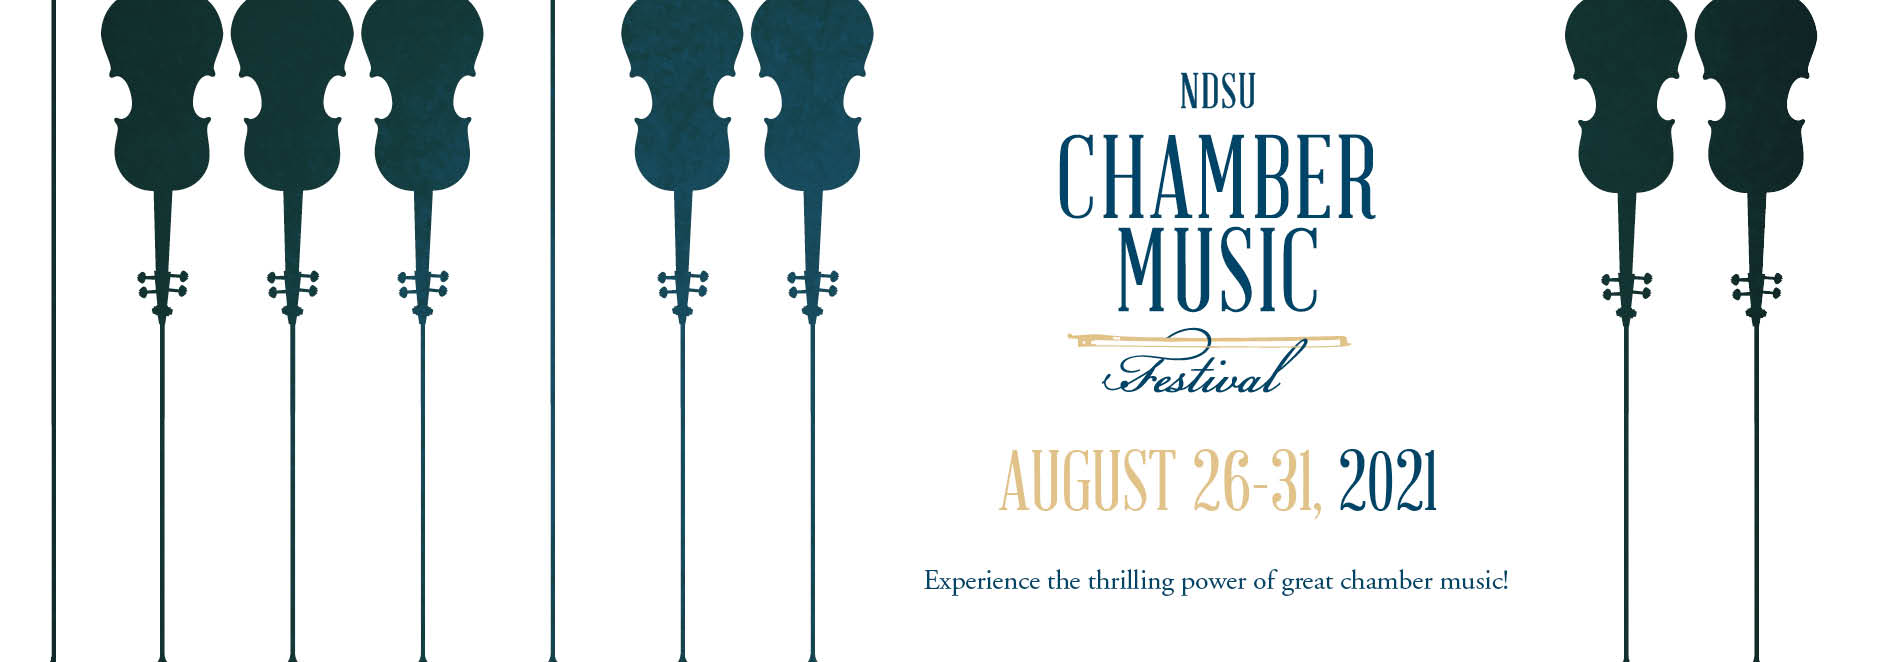 Chamber Music Festival Challey School of Music